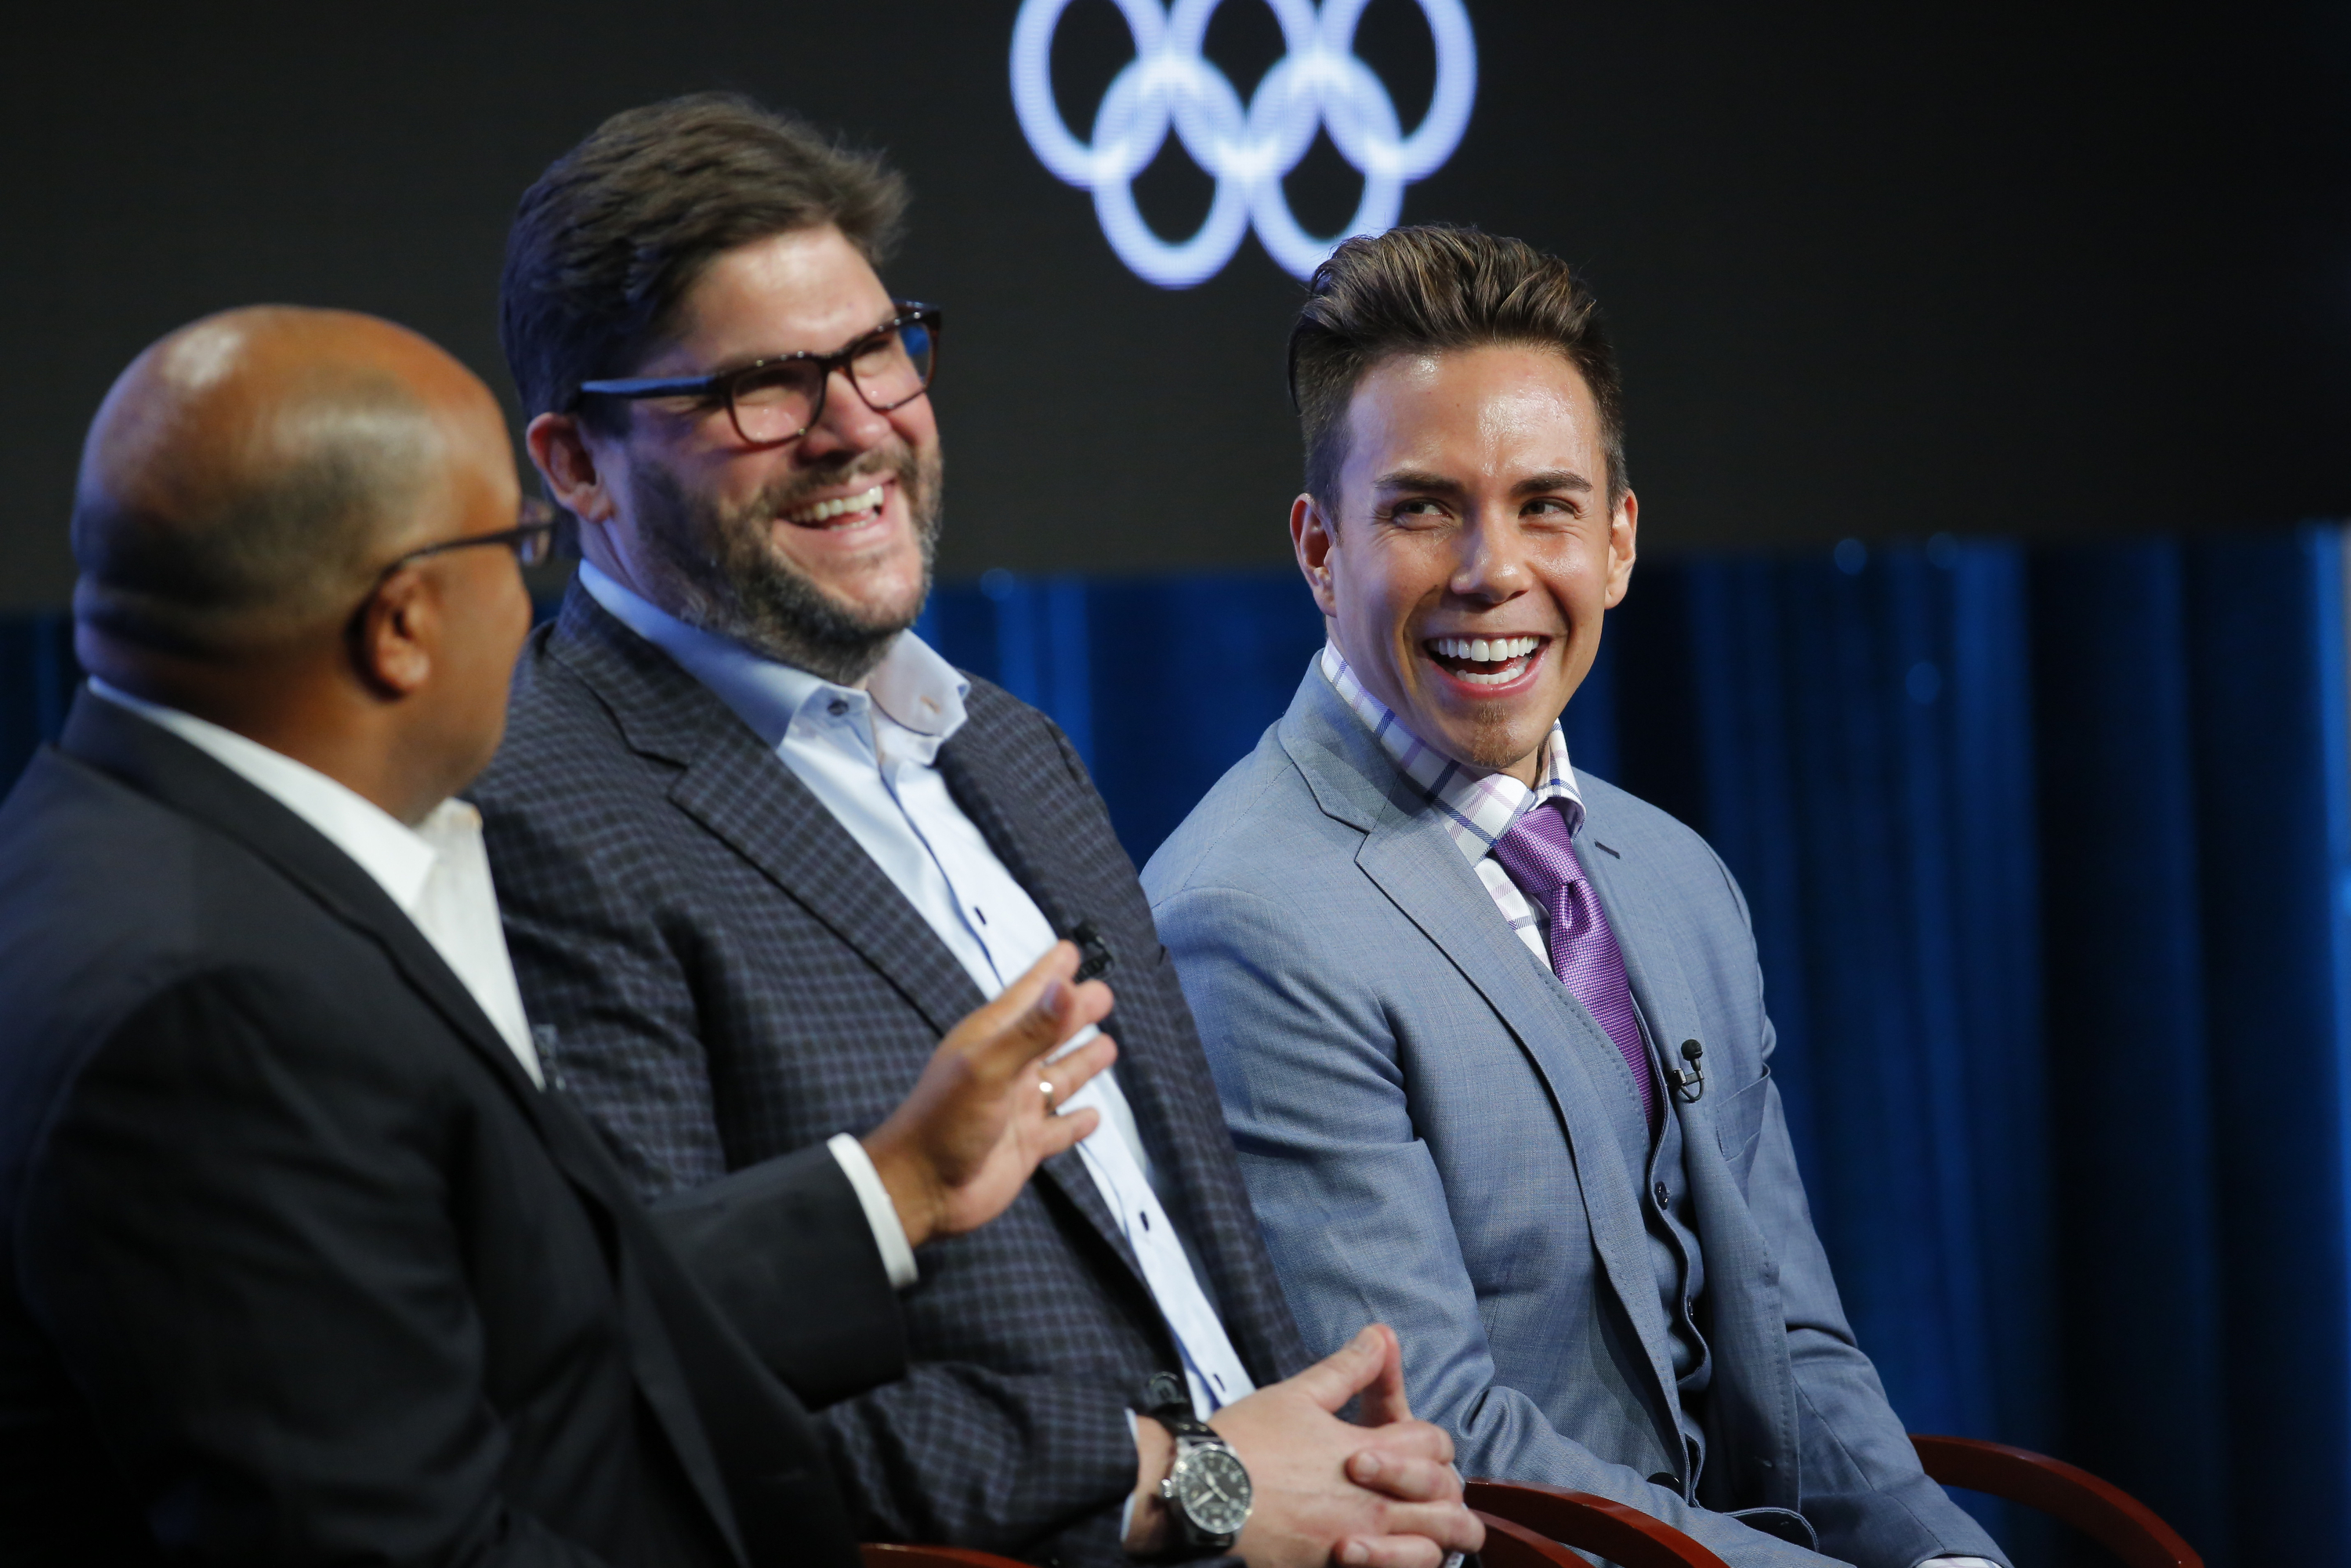 NBCUNIVERSAL EVENTS -- NBCUniversal Press Tour, August 2017 -- "The Winter Olympics" Session -- Pictured: (l-r) Mike Tirico, Primetime Host, NBC Olympics; Jim Bell, President, NBC Olympics Production & Programming; Apolo Ohno, Short Track Speed Skating Analyst -- (Photo by: Chris Haston/NBC/NBCU Photo Bank via Getty Images)